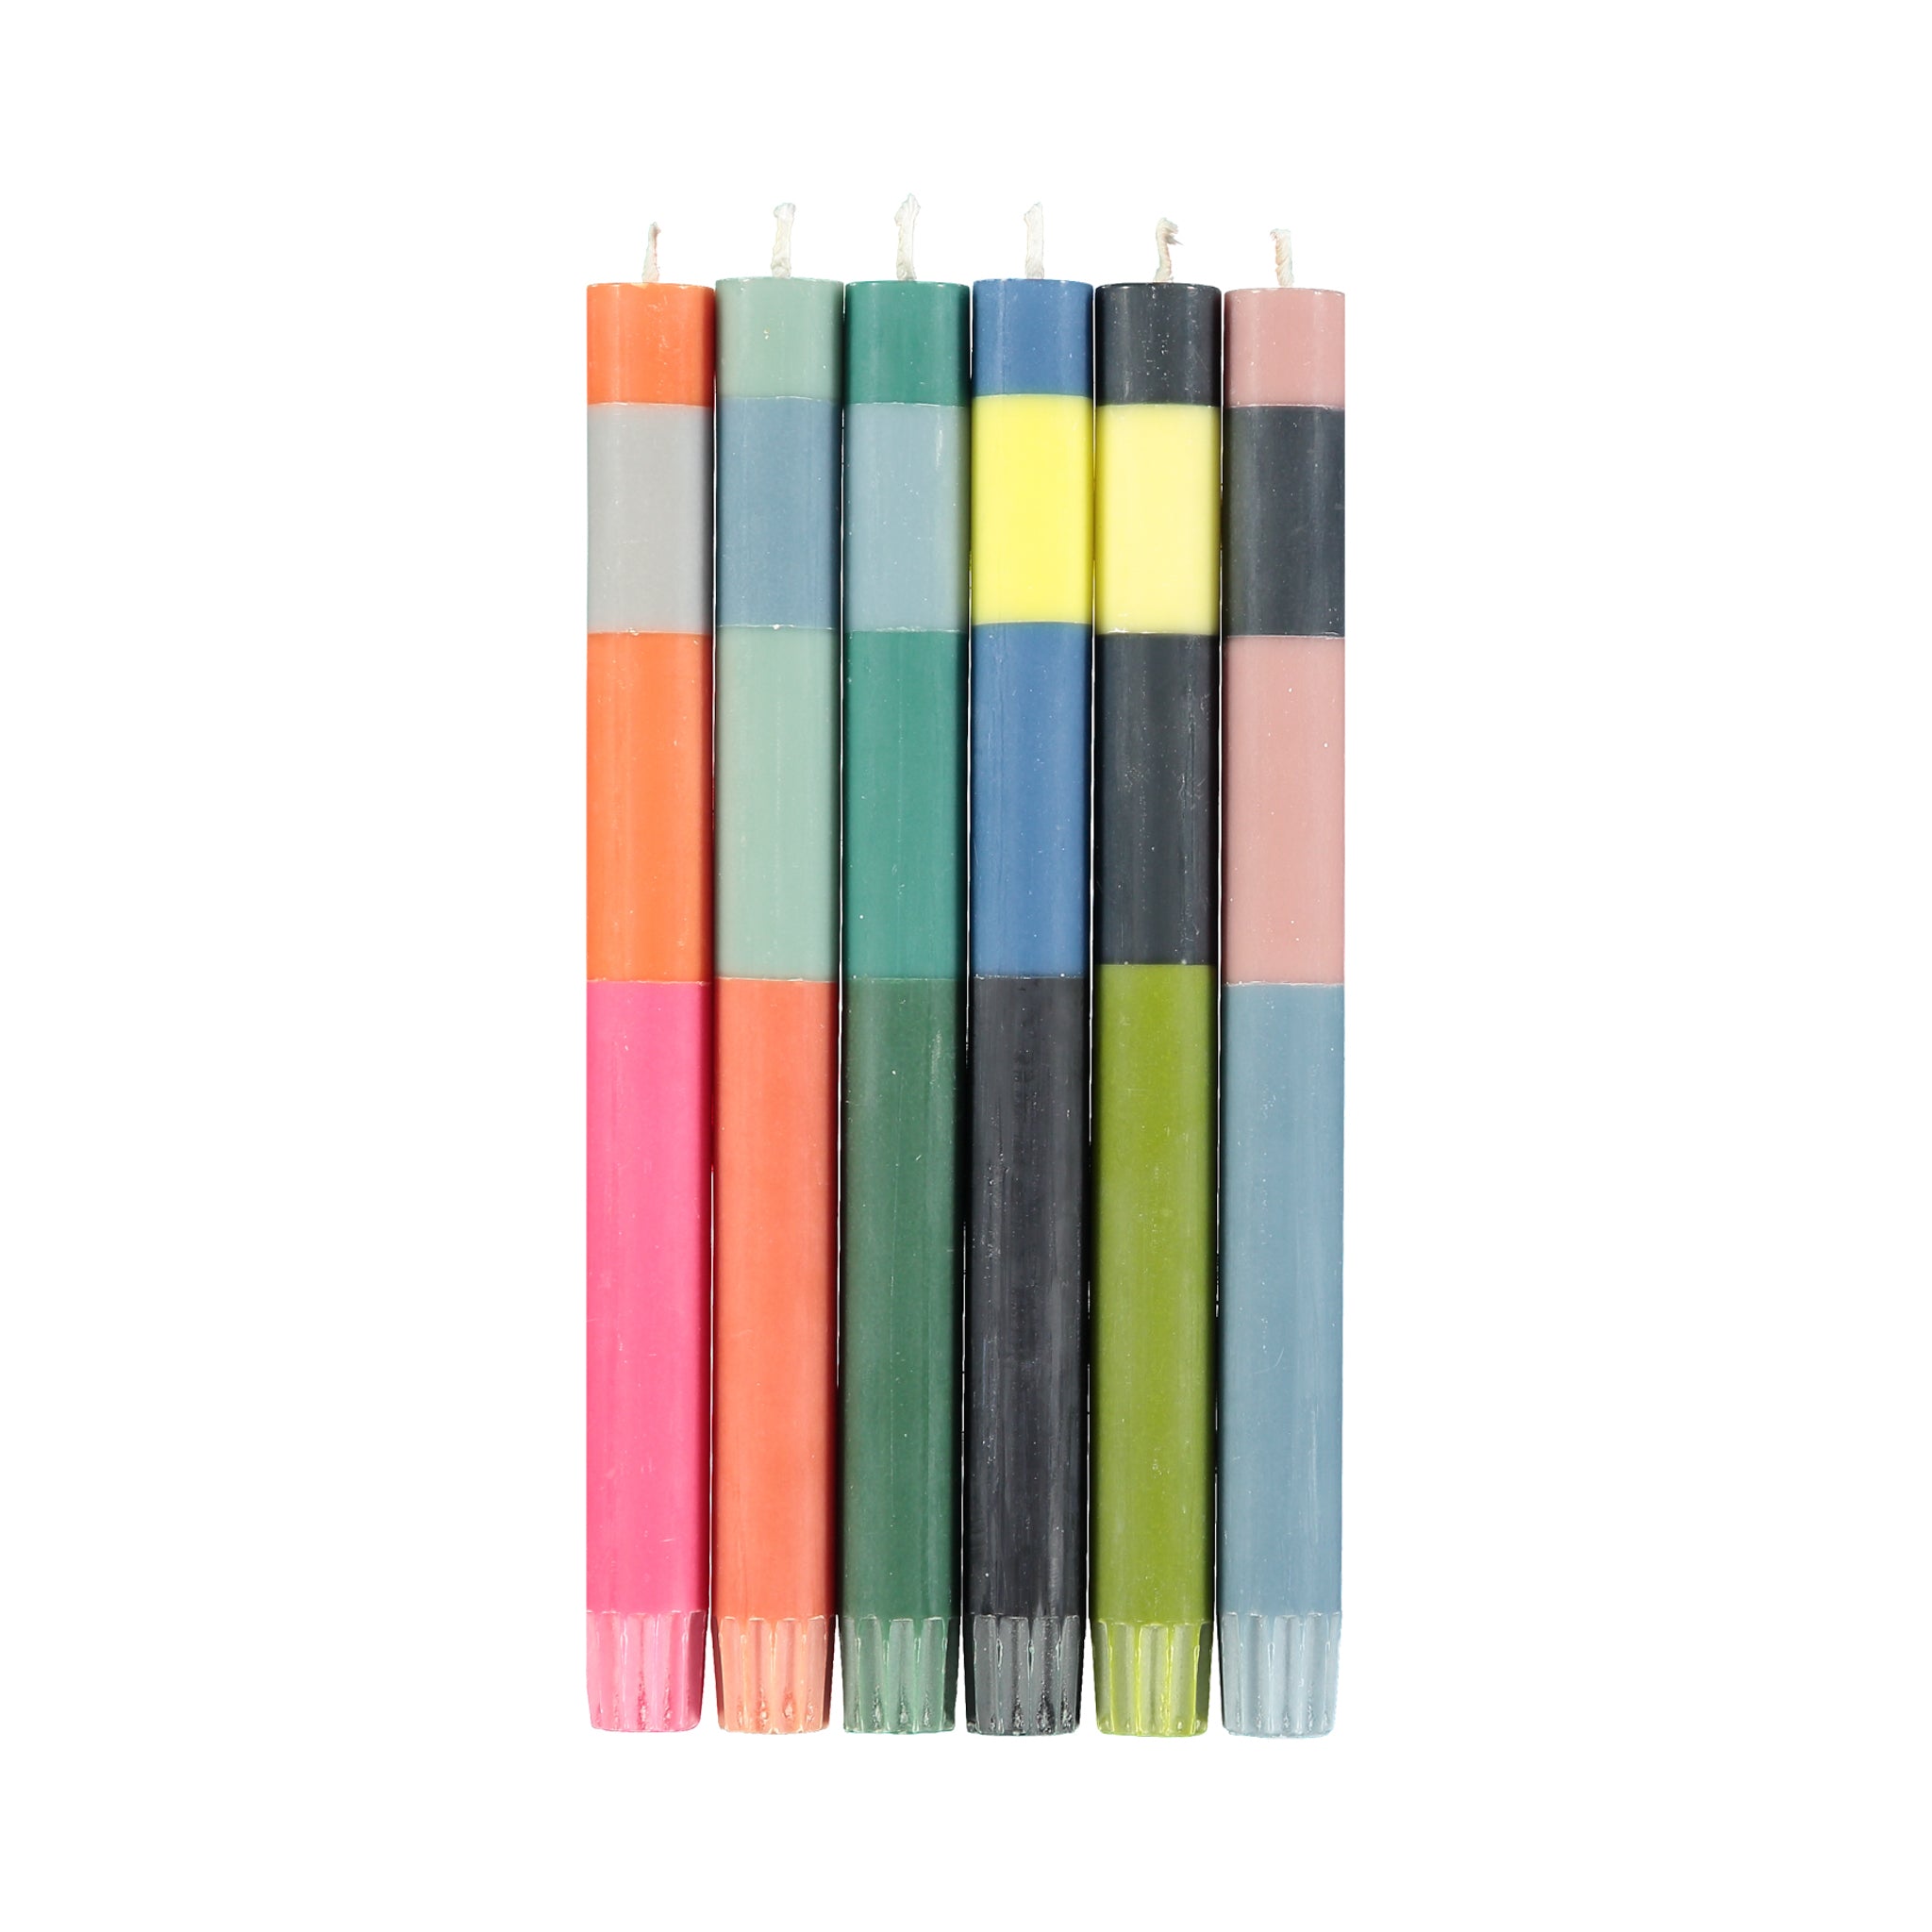 Colourblock Dinner Candles -Multicolour abstract set of 6